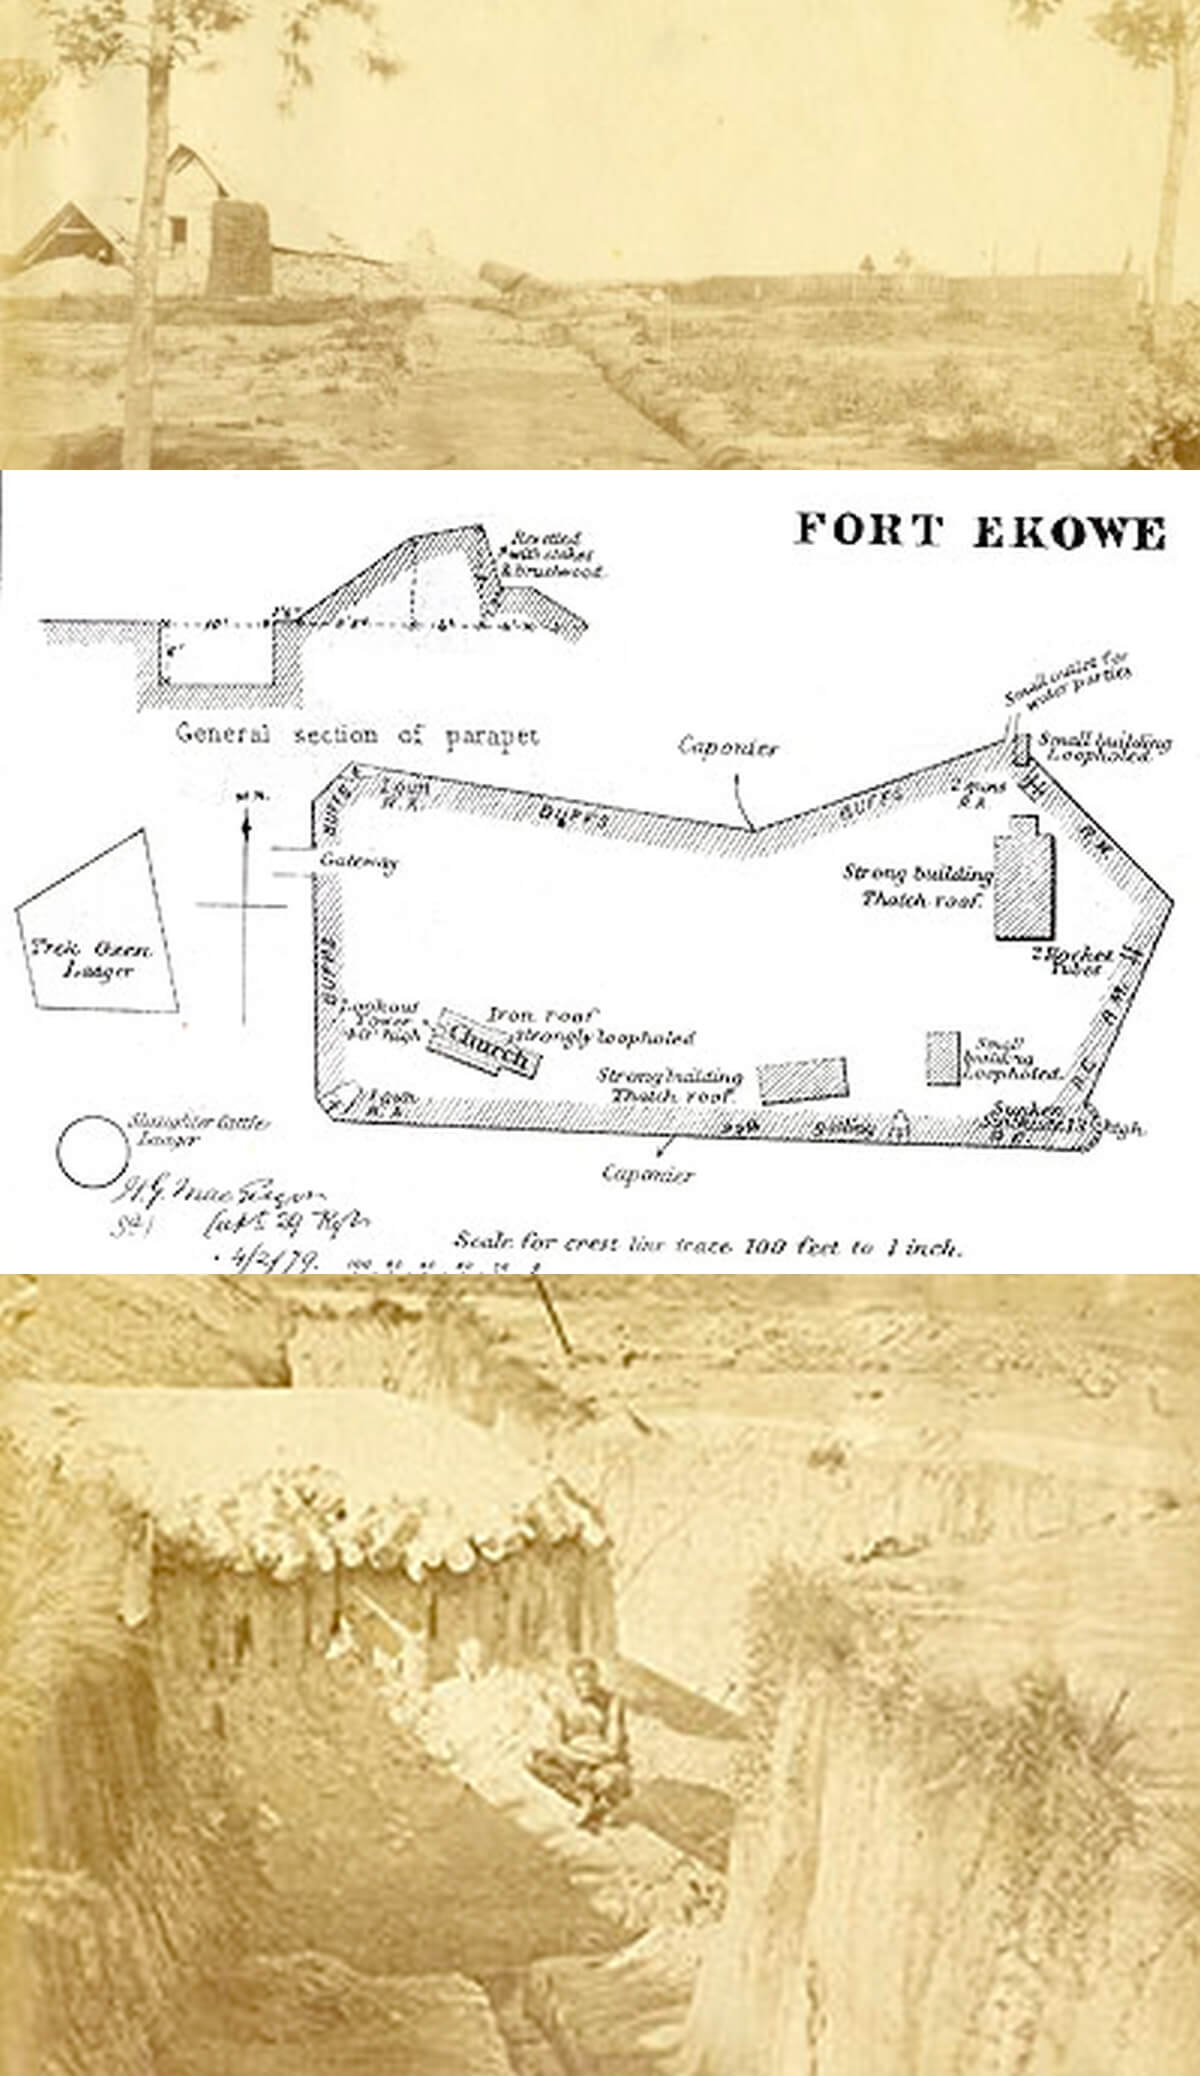 Drawings and map of Fort Eshowe 1879